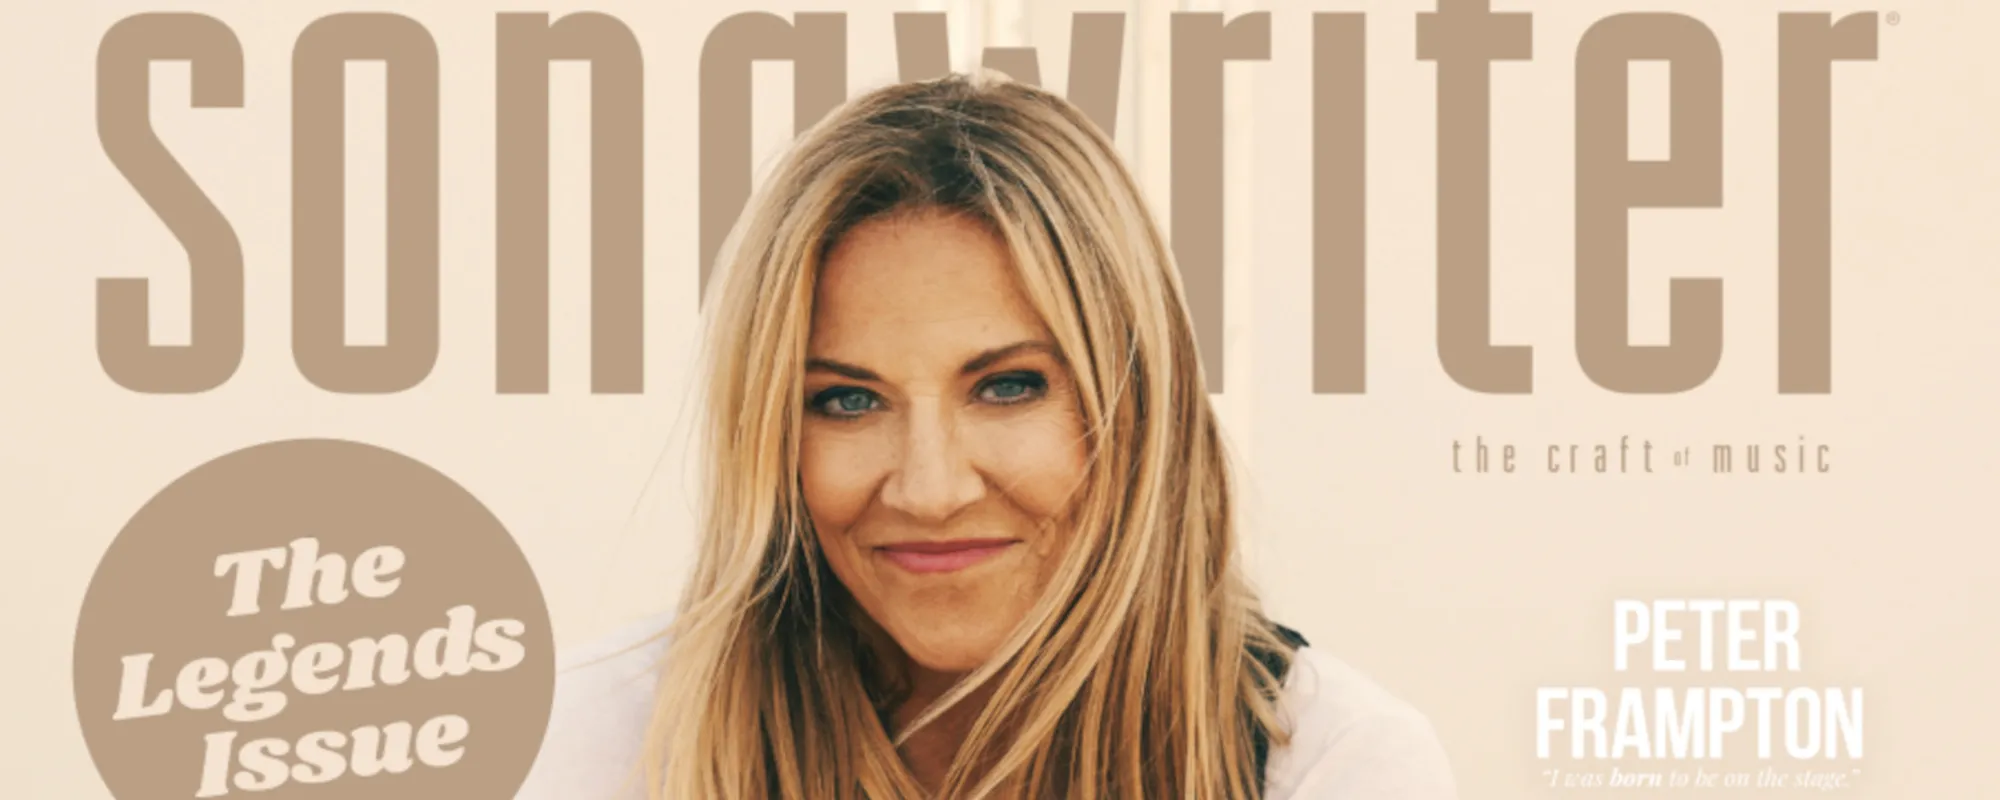 American Songwriter January/February Cover Story: Sheryl Crow Pours Honesty and Vulnerability into Her Music—“Telling the Truth Feels Instinctual”